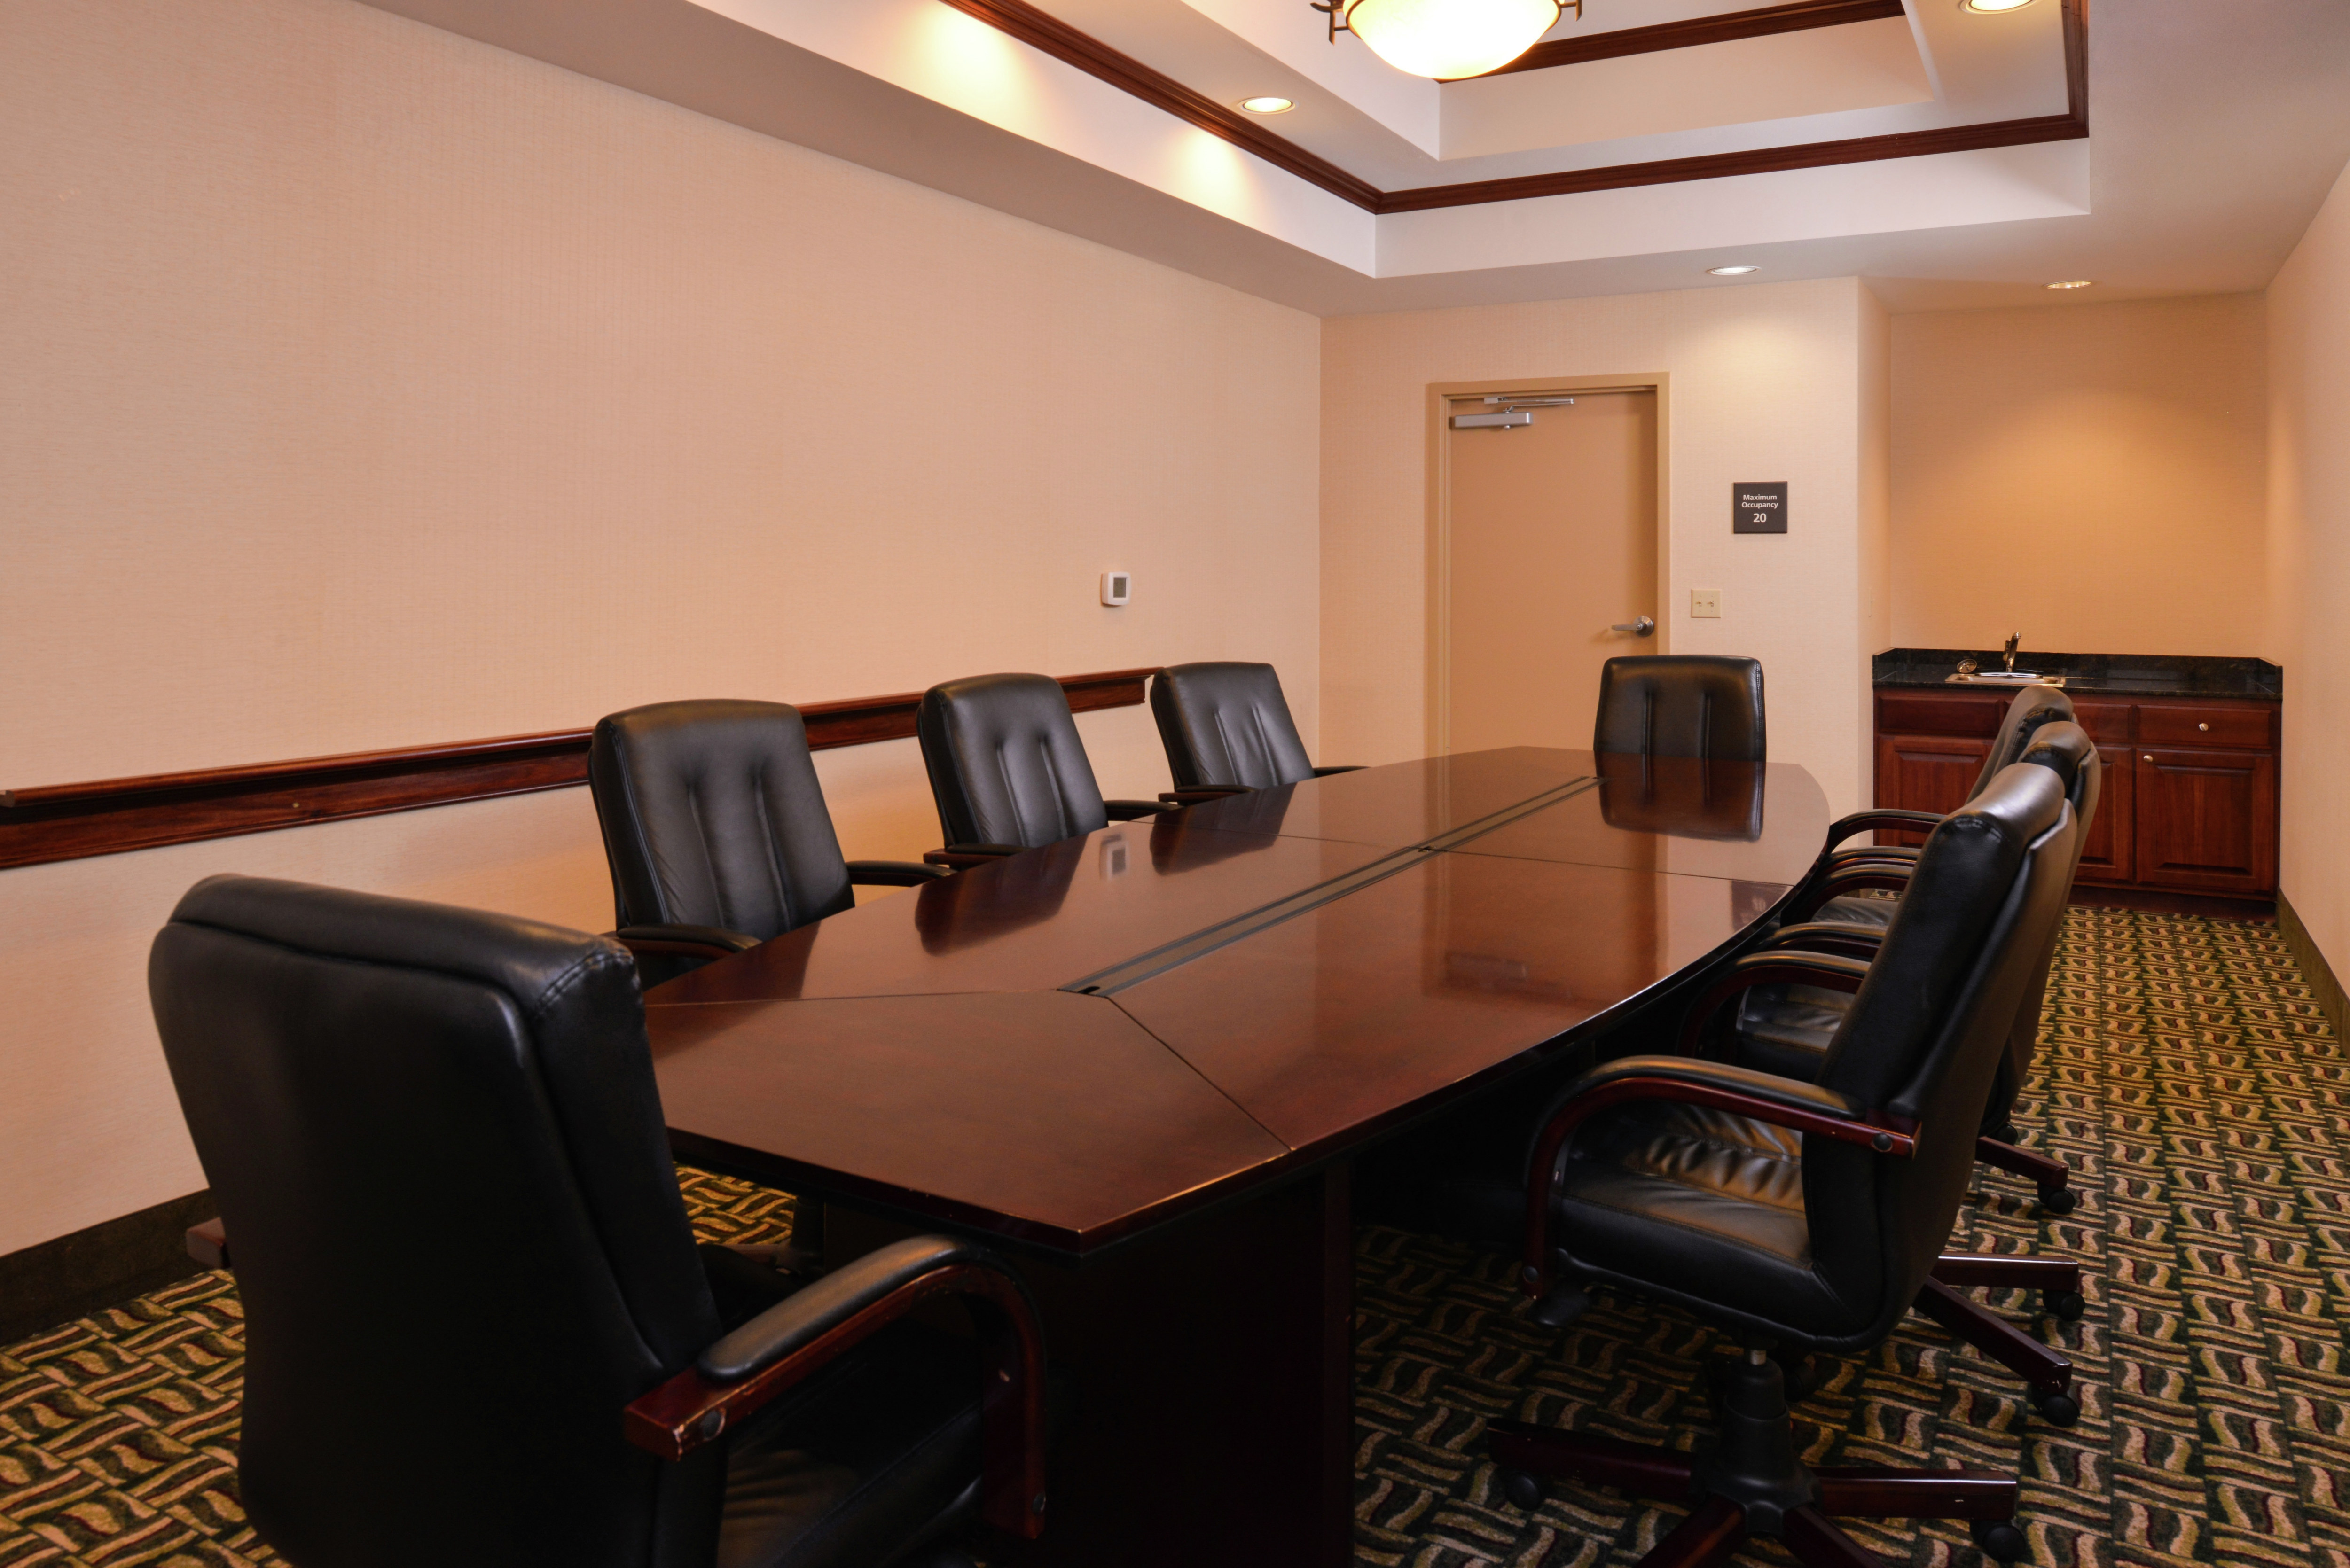 Seating For 8 at Private Boardroom Table, Entry, and Wet Bar